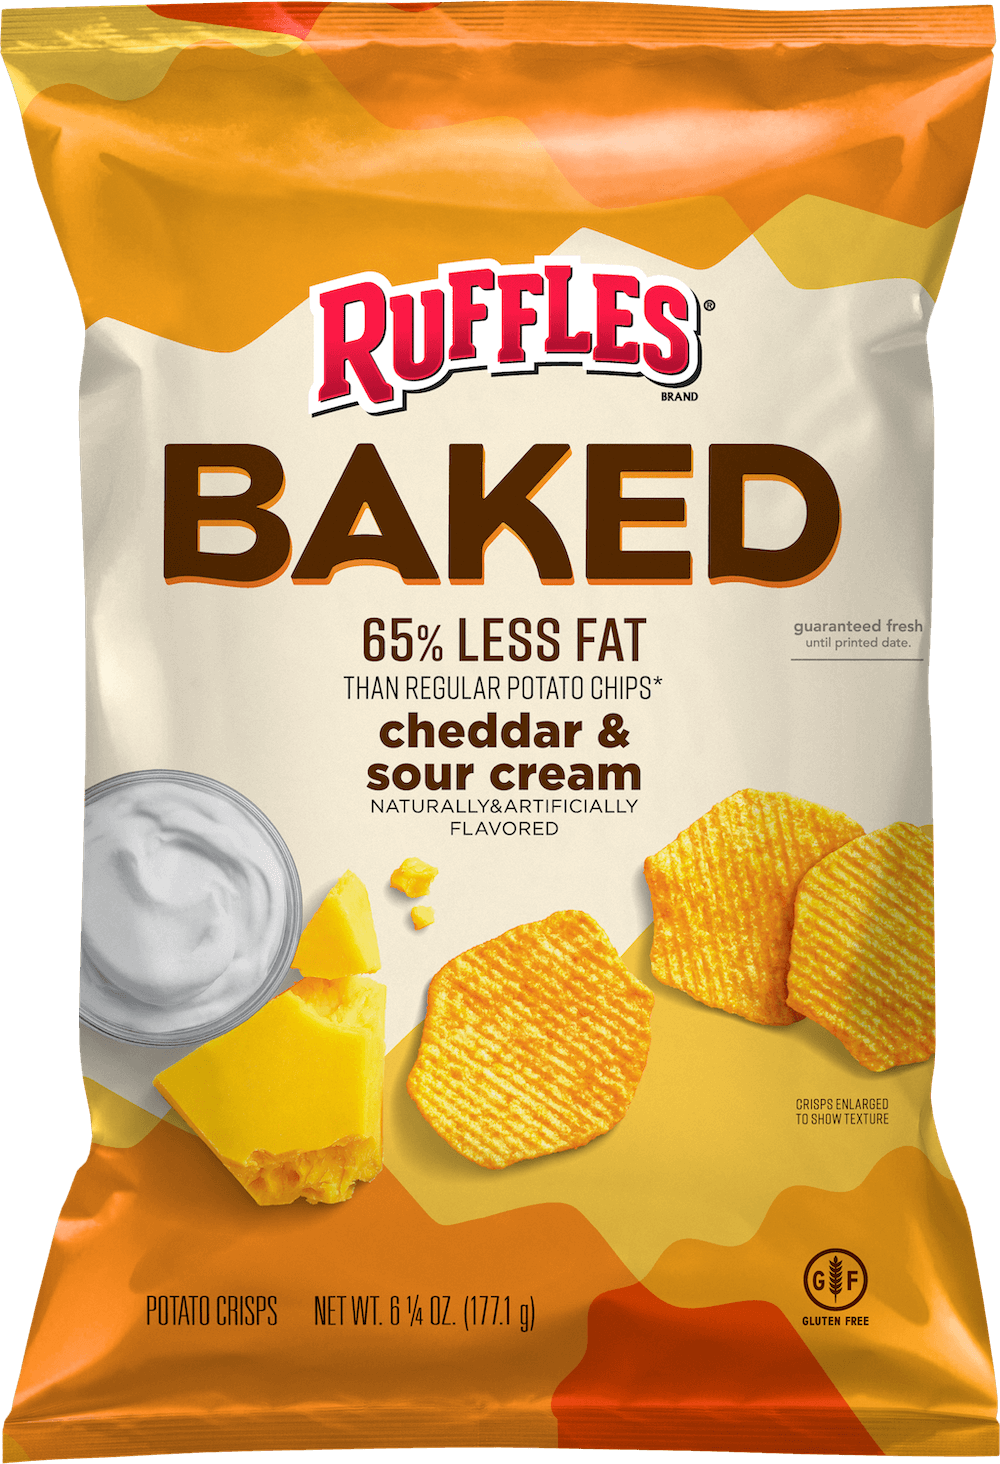 https://www.fritolay.com/sites/fritolay.com/files/2022-02/Baked_2021_Ruffles_CSC_6.25oz_Render.png